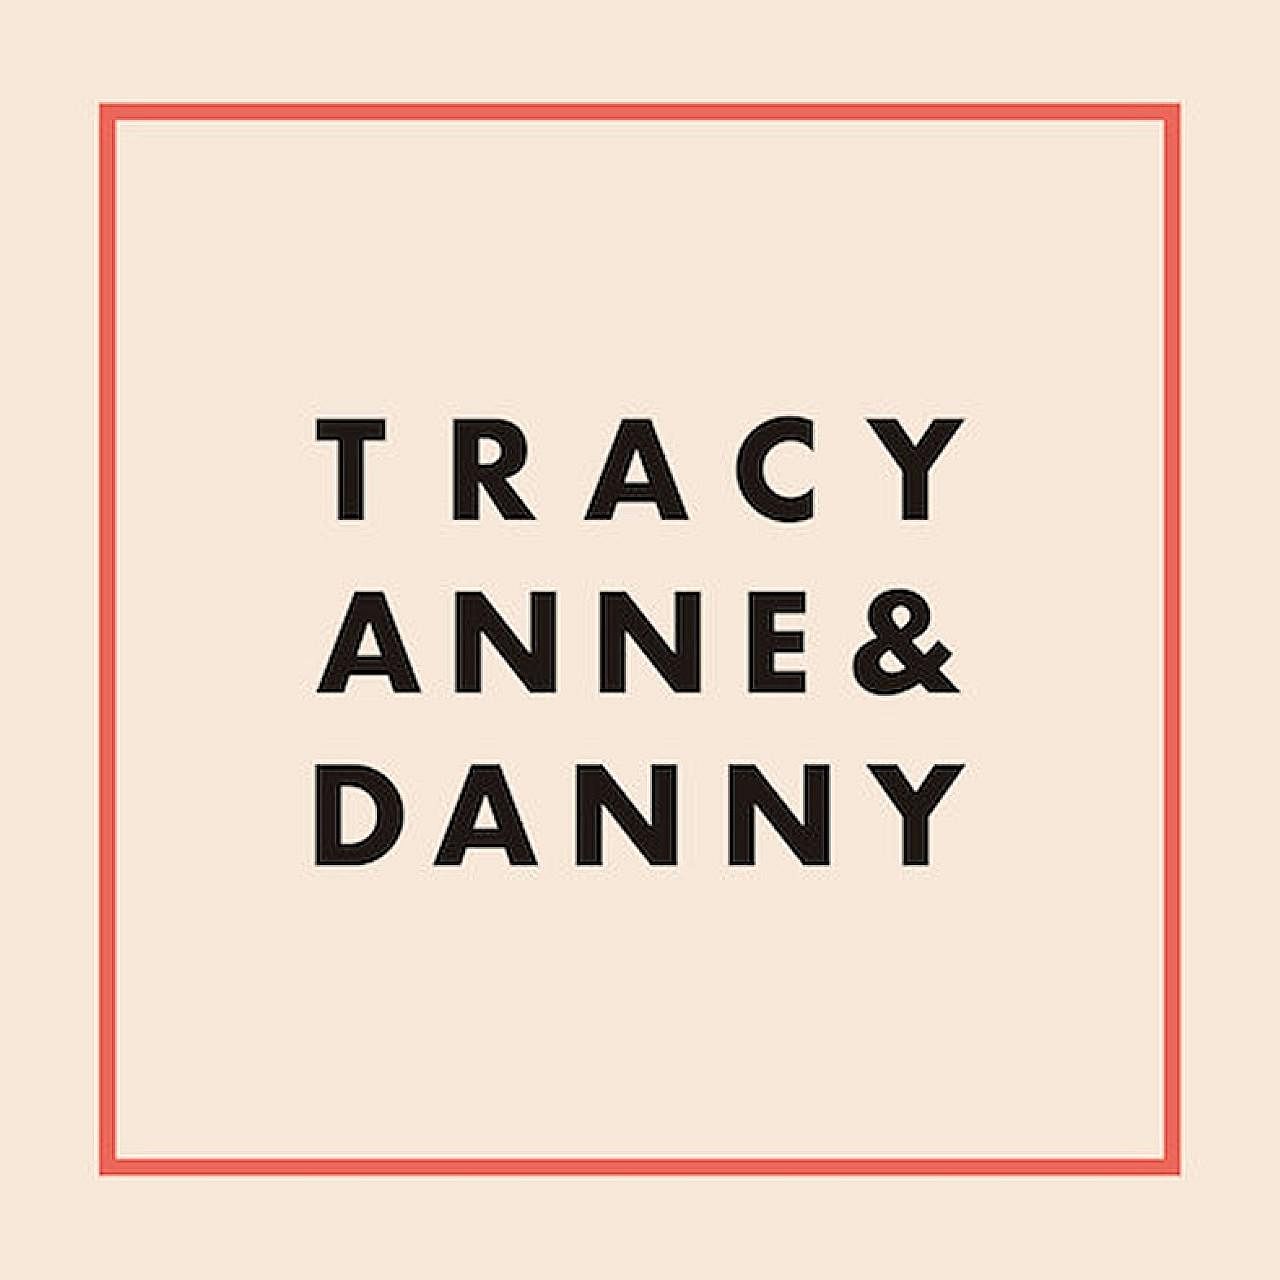 Tracyanne Campbell of Glaswegian indie collective Camera Obscura and Bristol-based songsmith Danny Coughlan team up on Tracyanne & Danny.